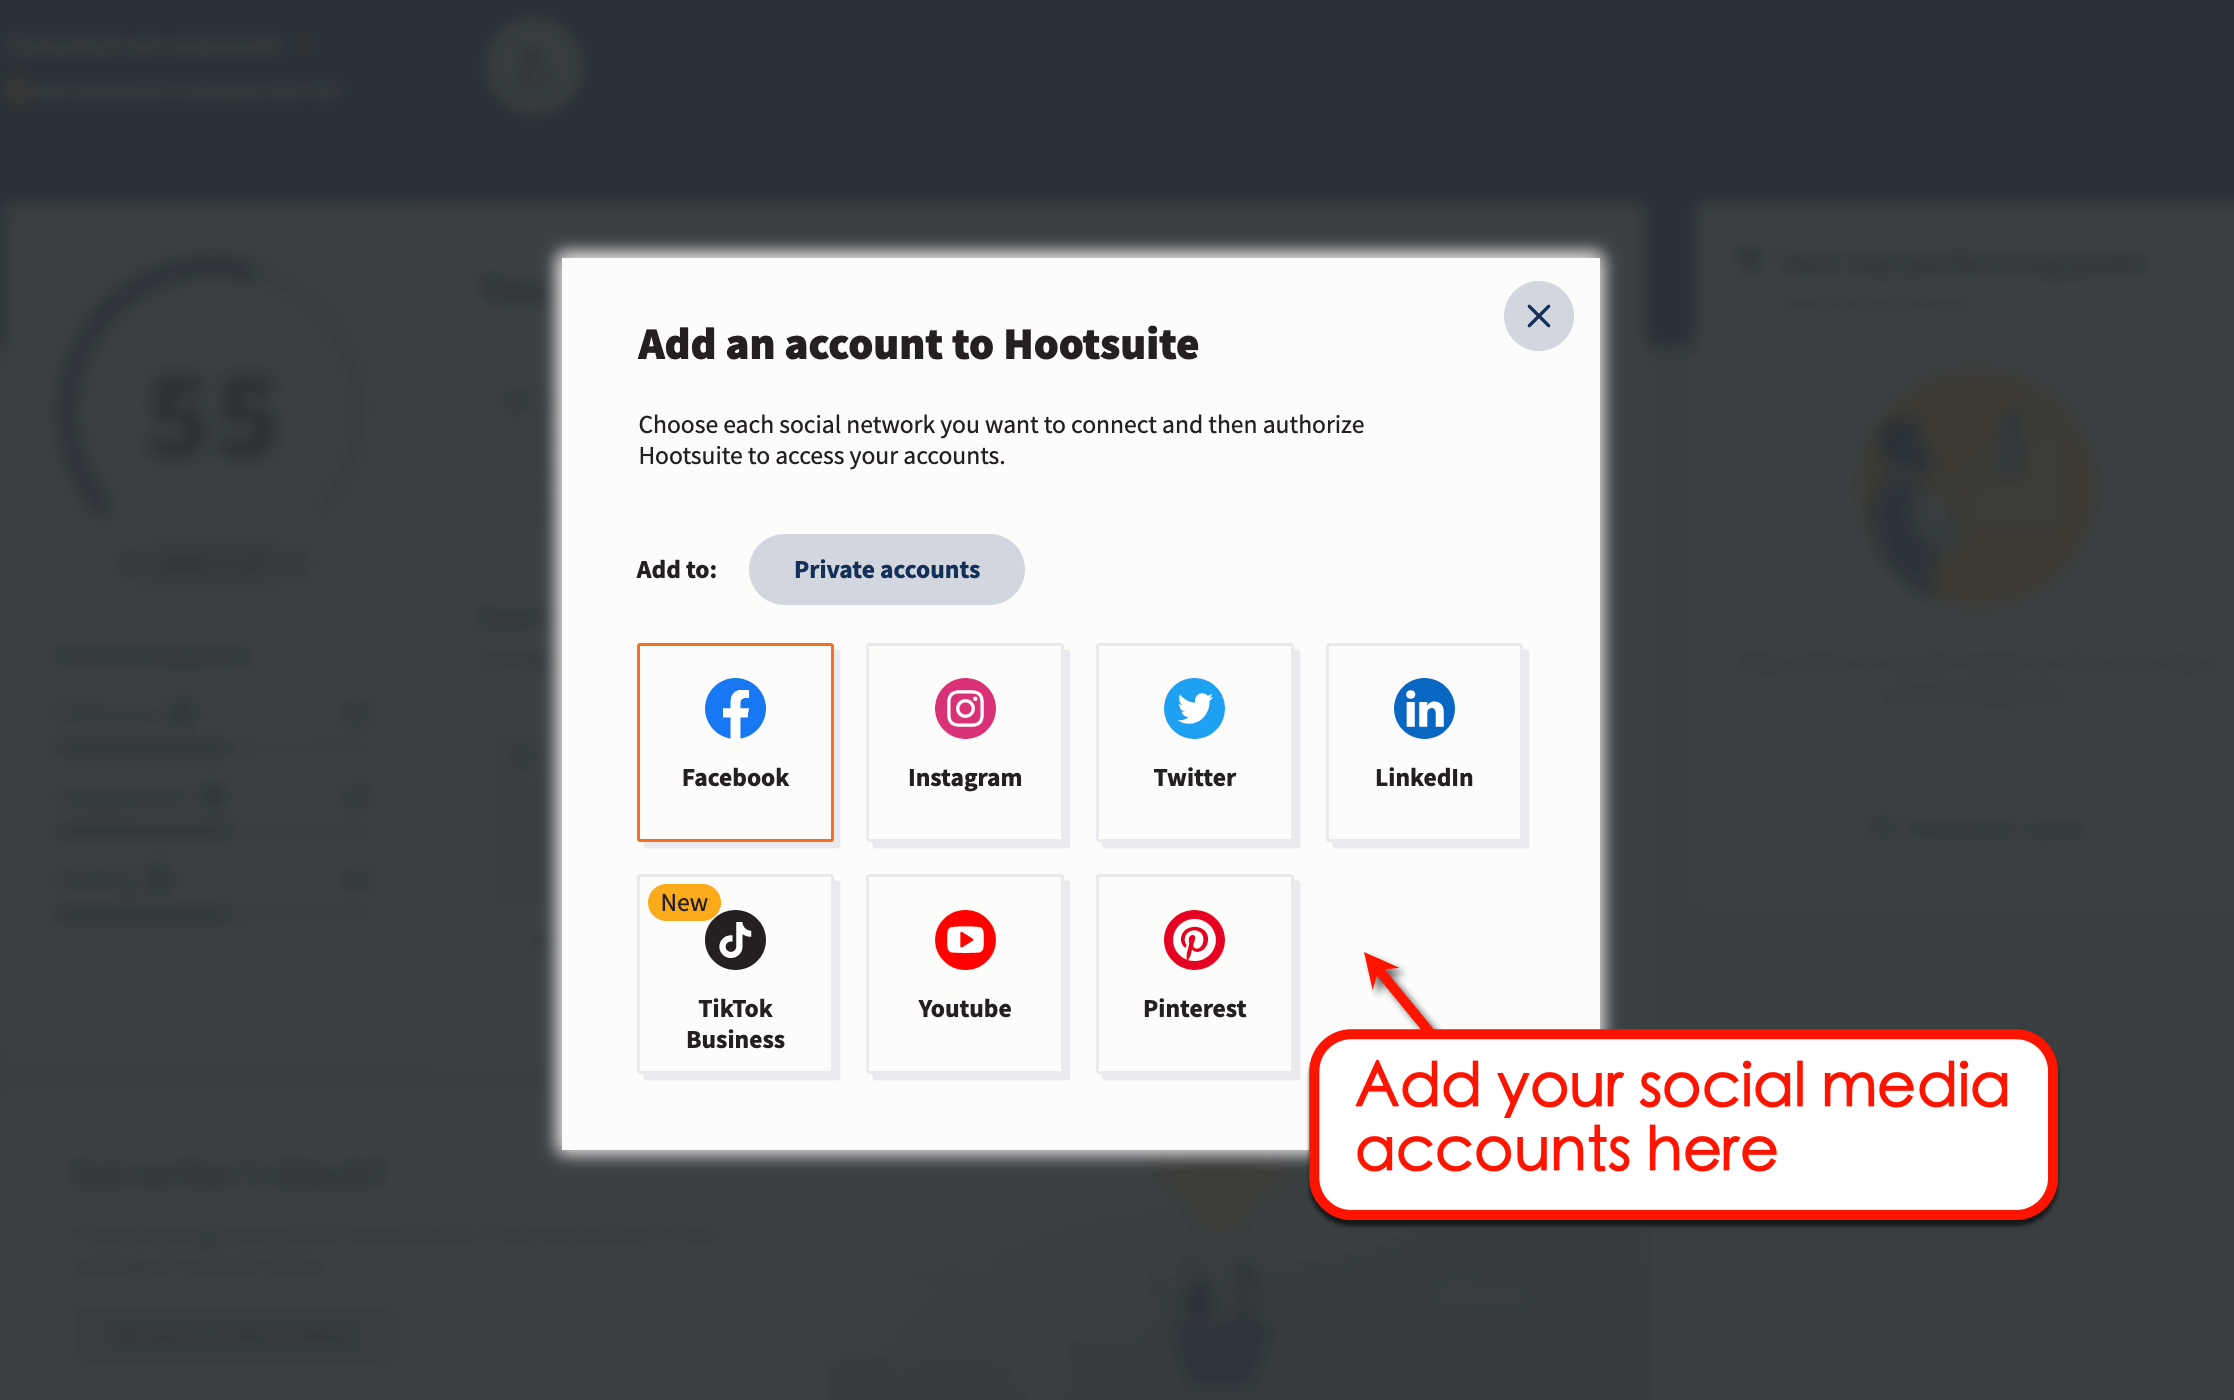 Add an account in Hootsuite